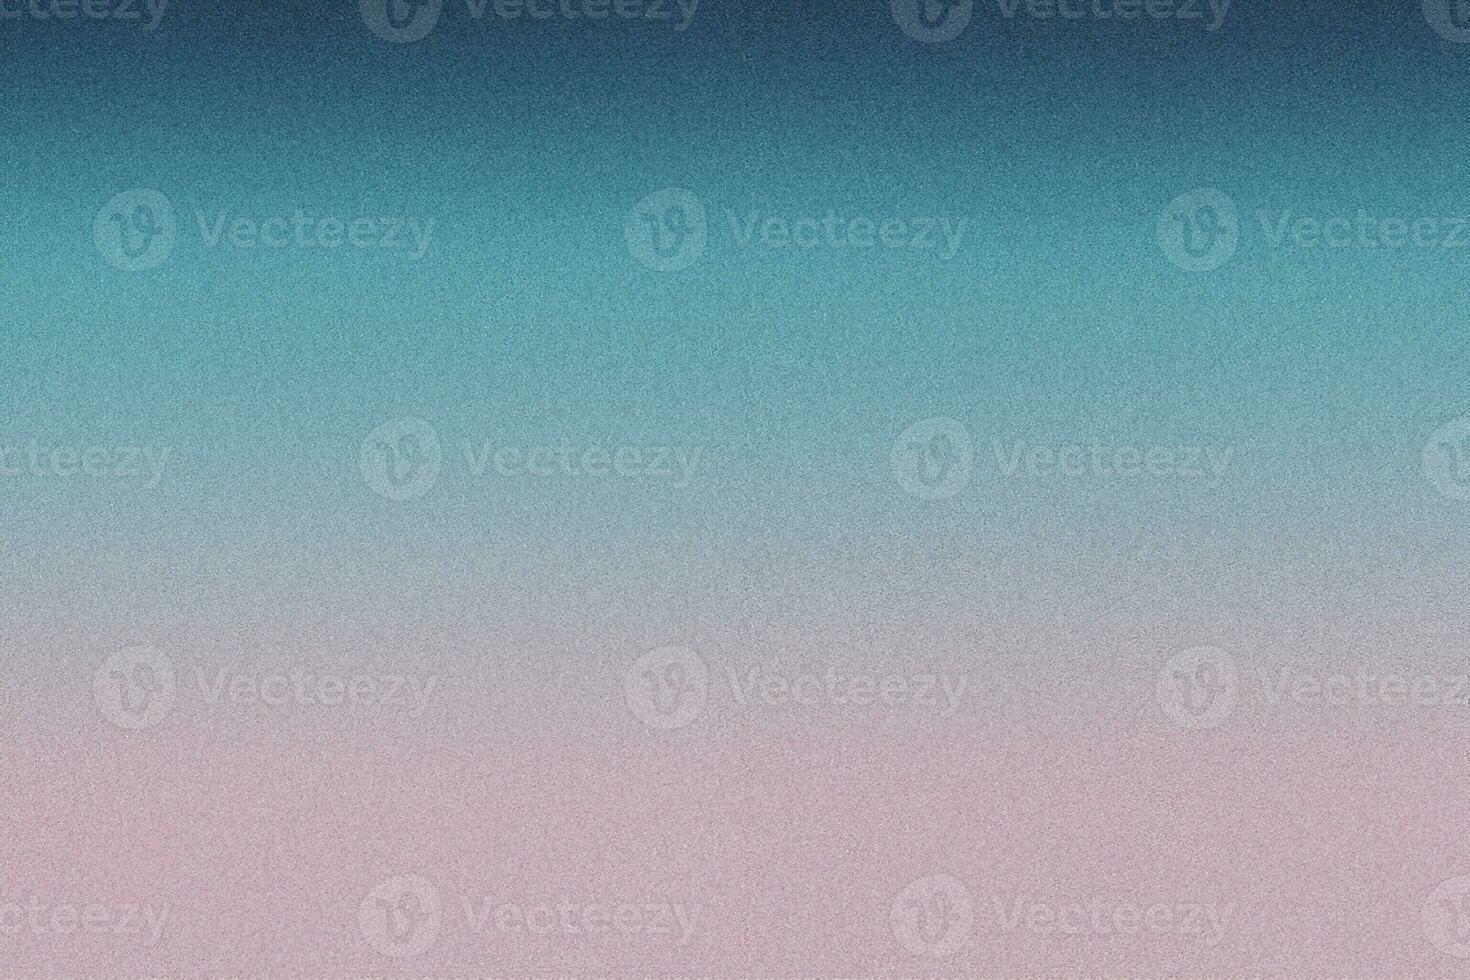 Digital noise gradient. Nostalgia, vintage, retro 70s, 80s style. Abstract lo-fi background. Retro wave, synthwave. Wall, wallpaper, template, print. Minimalist. Blue, black, pink, turquoise colors photo